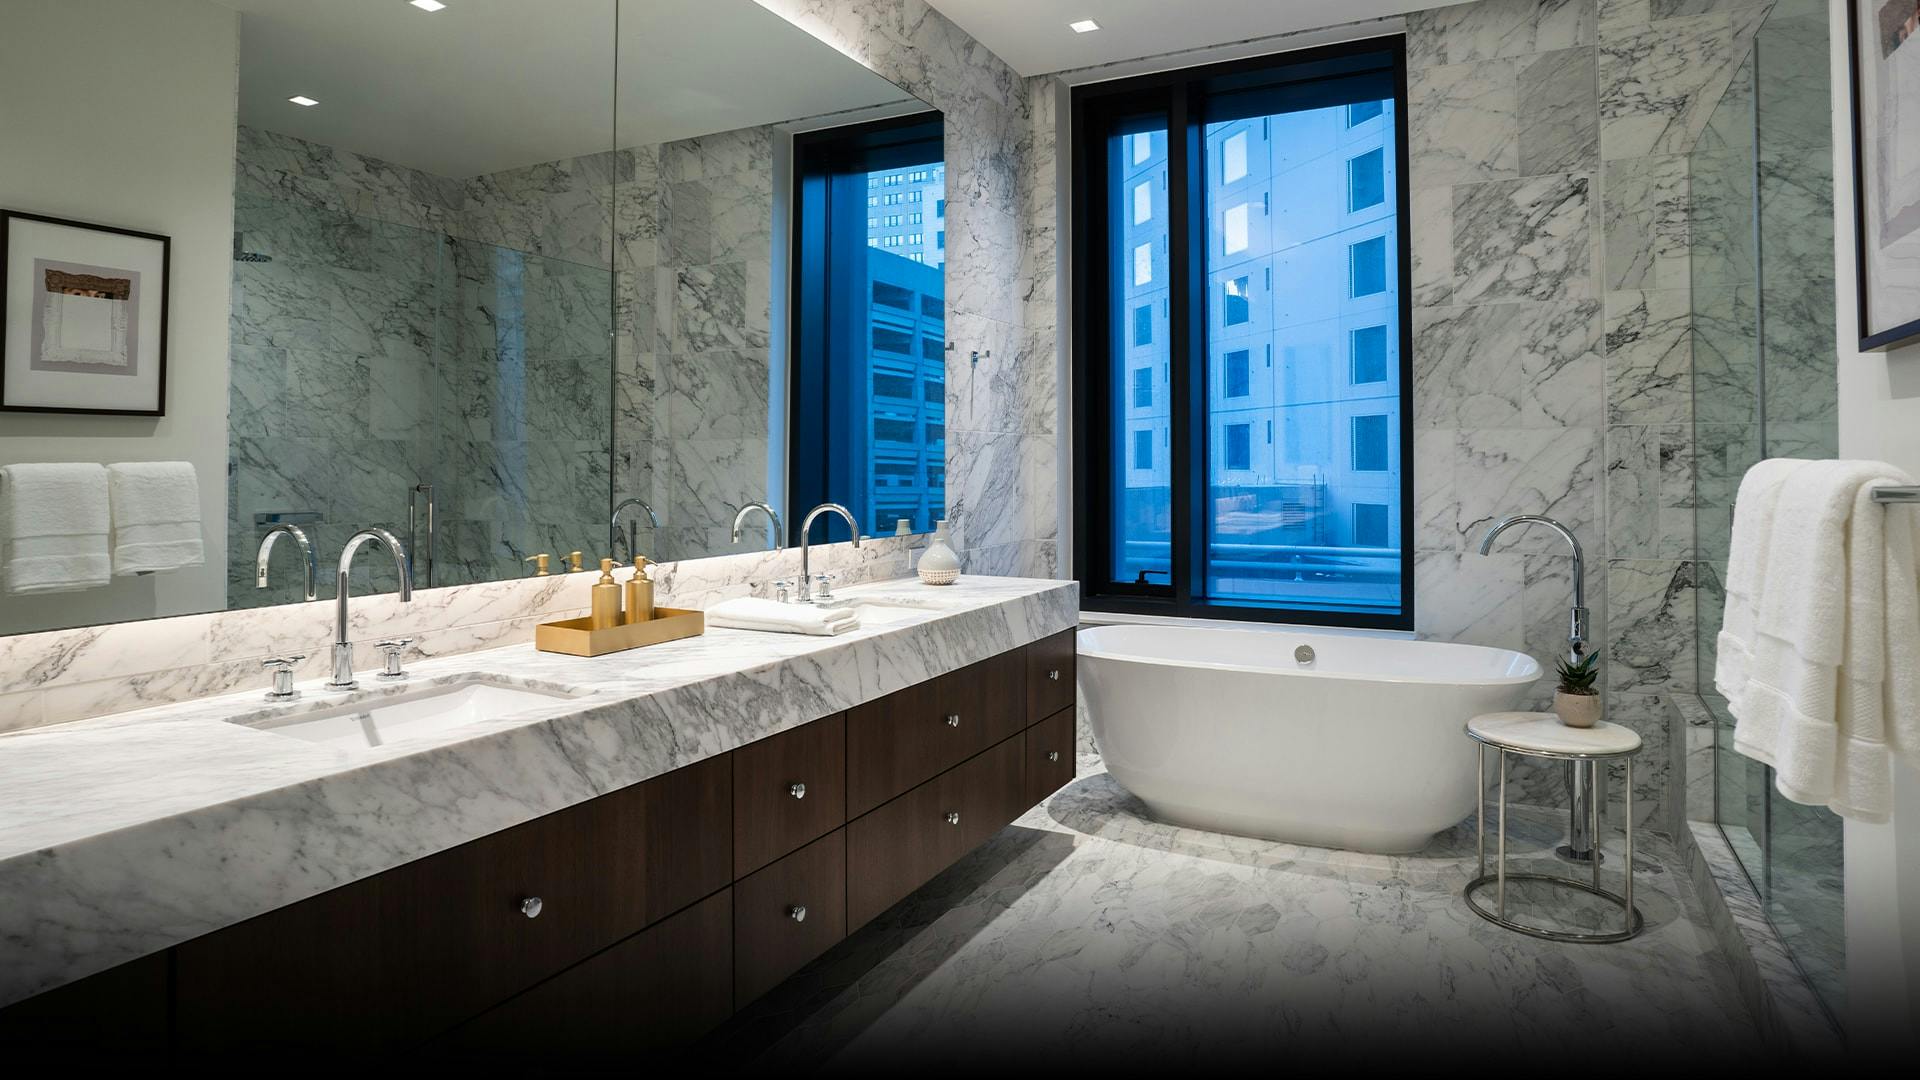 The master bathrooms in Aronson are adorned with arabescato marble and German milled cabinetry. They are complete with a free-standing Victora & Albut Amiata tub as a centerpiece. 